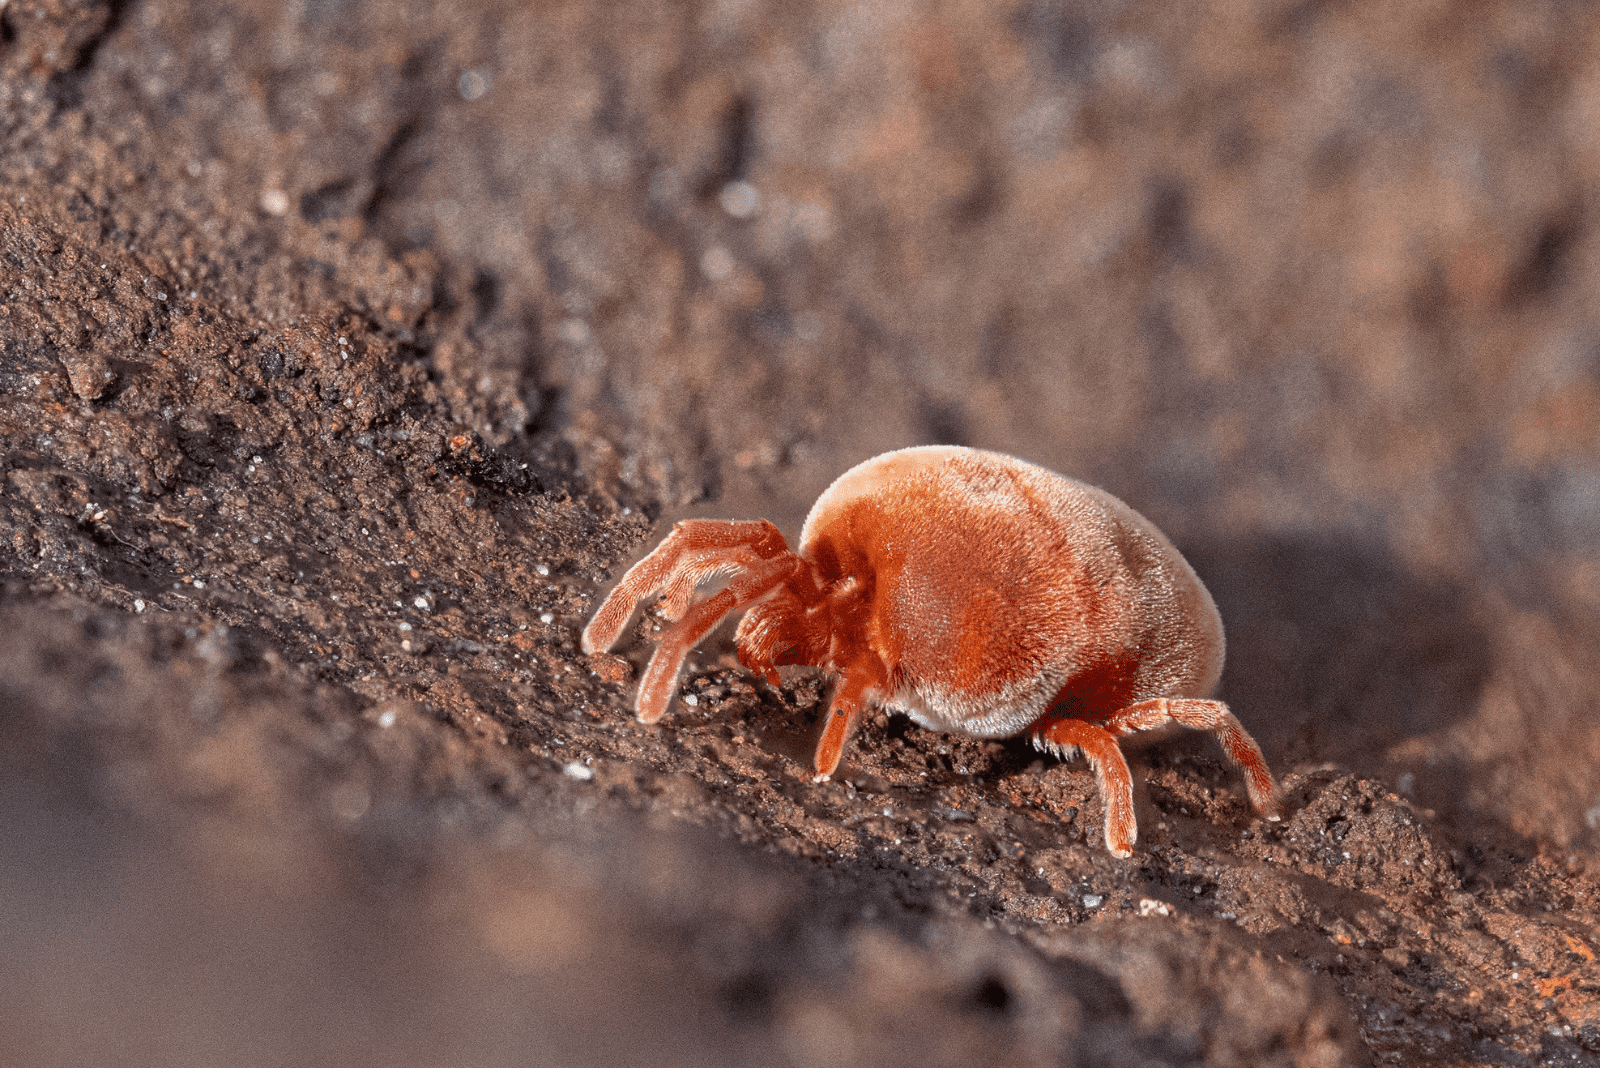 Soil Mites: Is It Good To Have Them Around Plants?